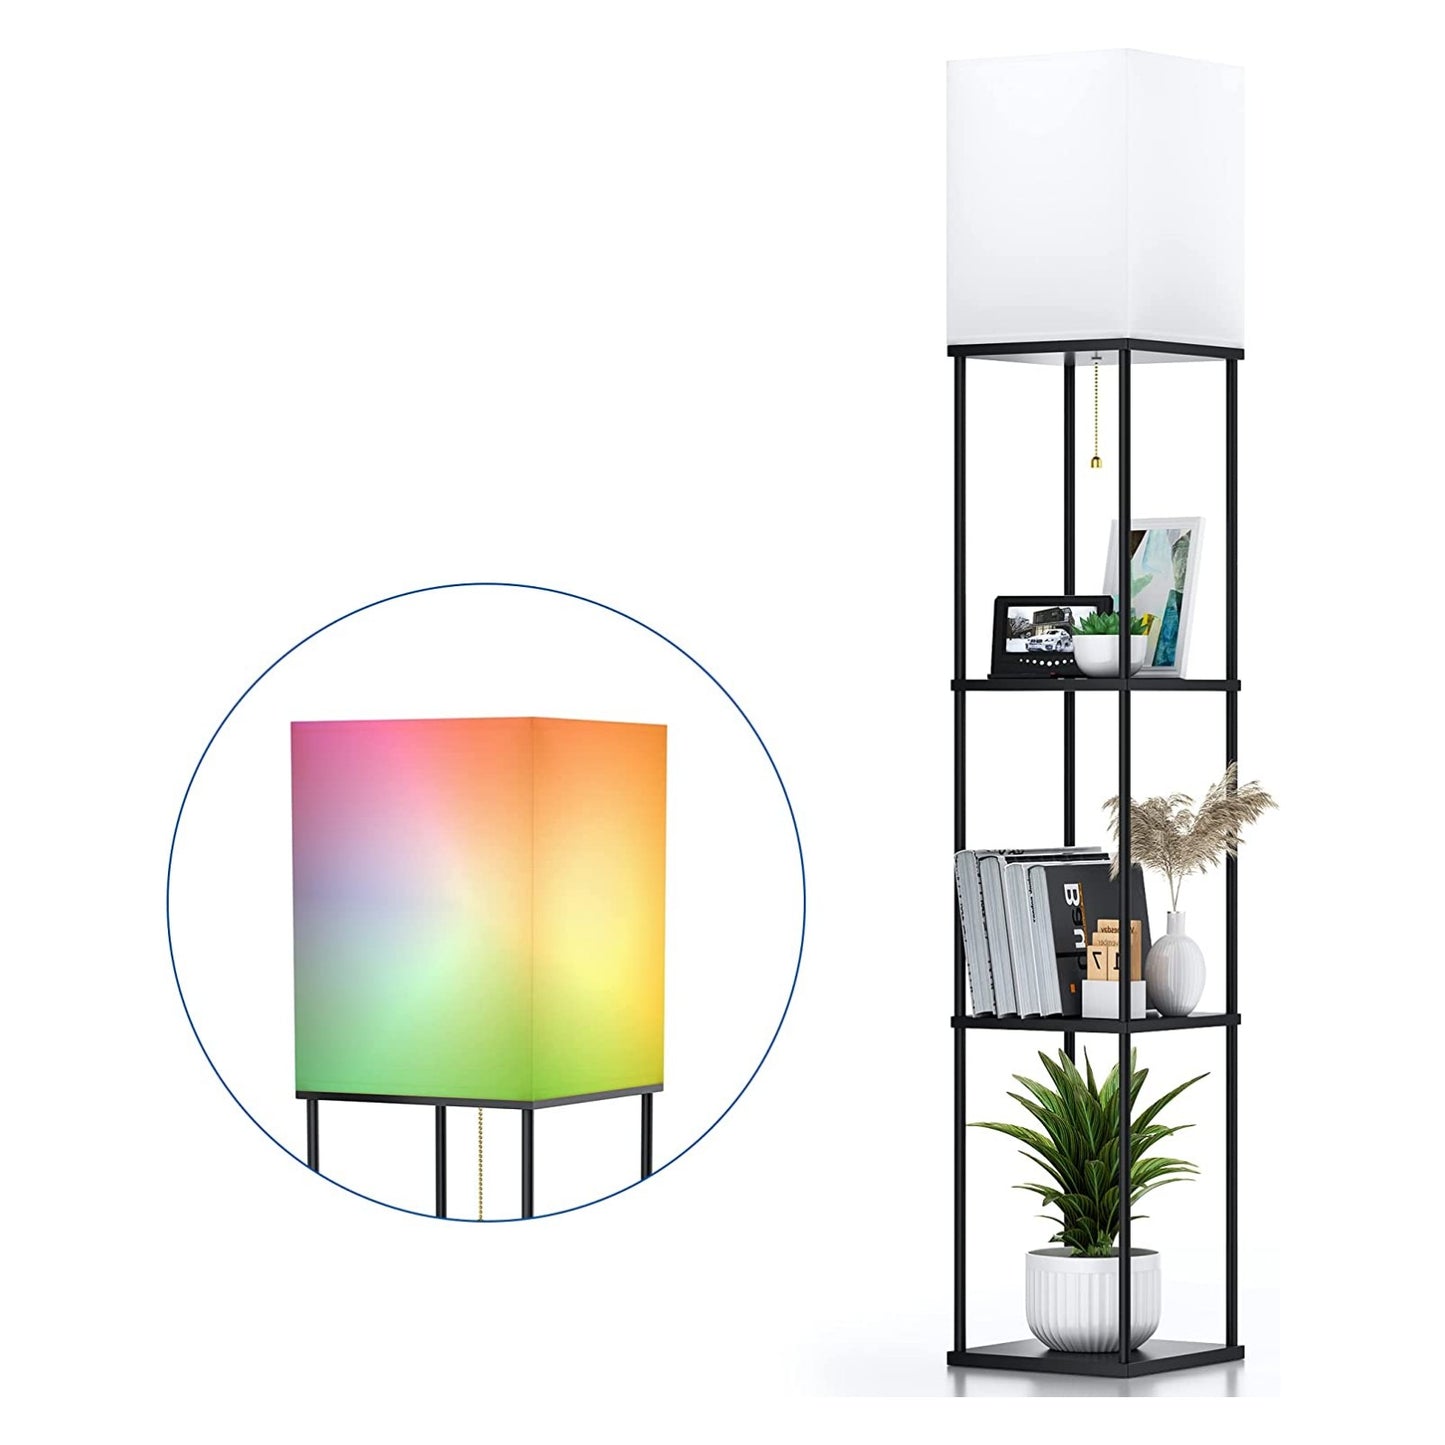 Floor Lamp With Shelves LED Modern Smart Standing Floor Lamp With 3 Color Temperature For Living Room, Bedroom